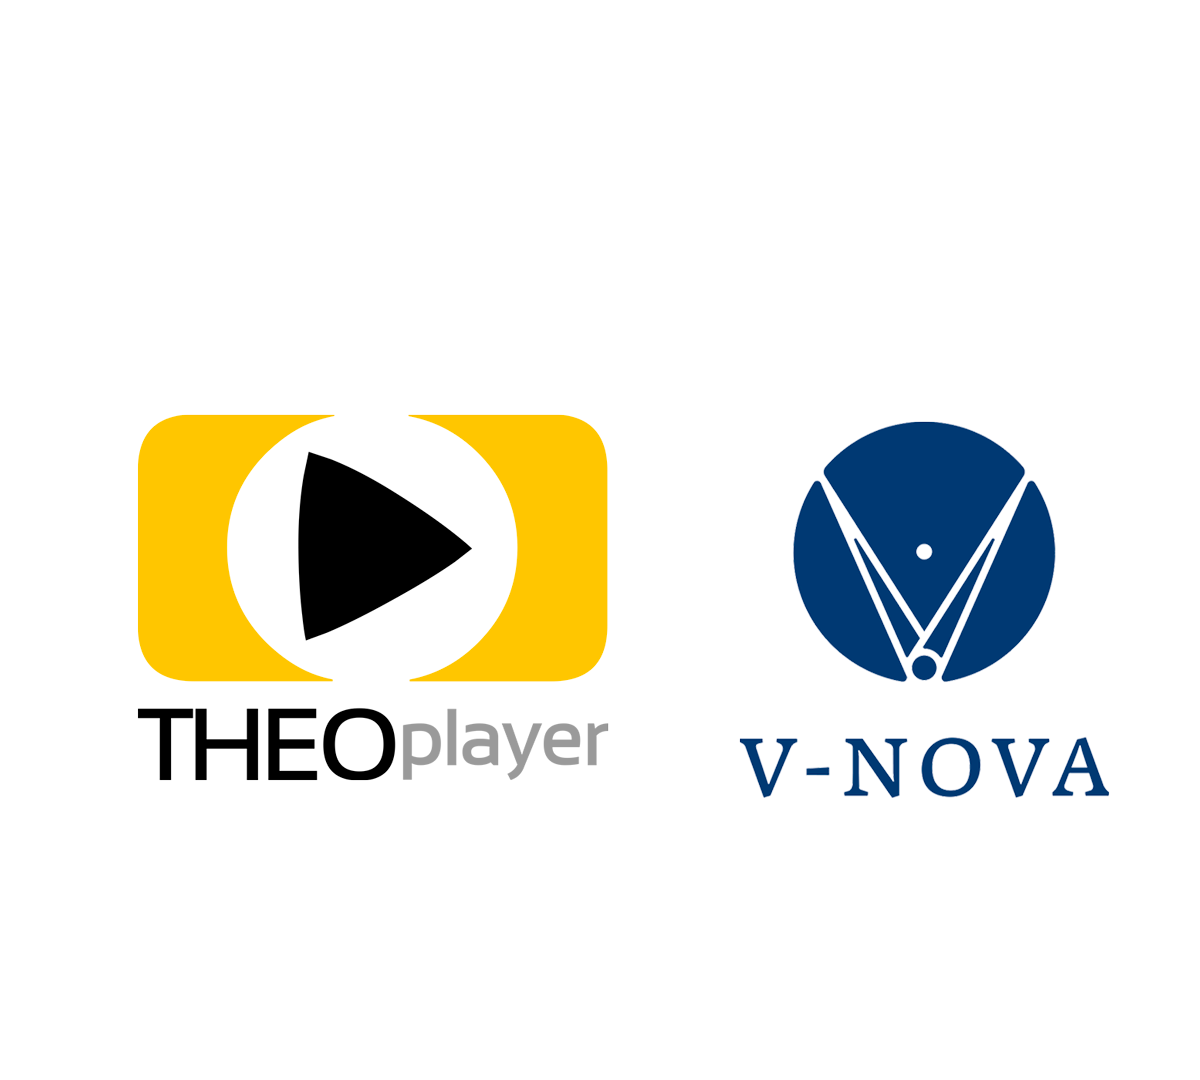 THEOplayer and V-Nova are partners with PERSEUS